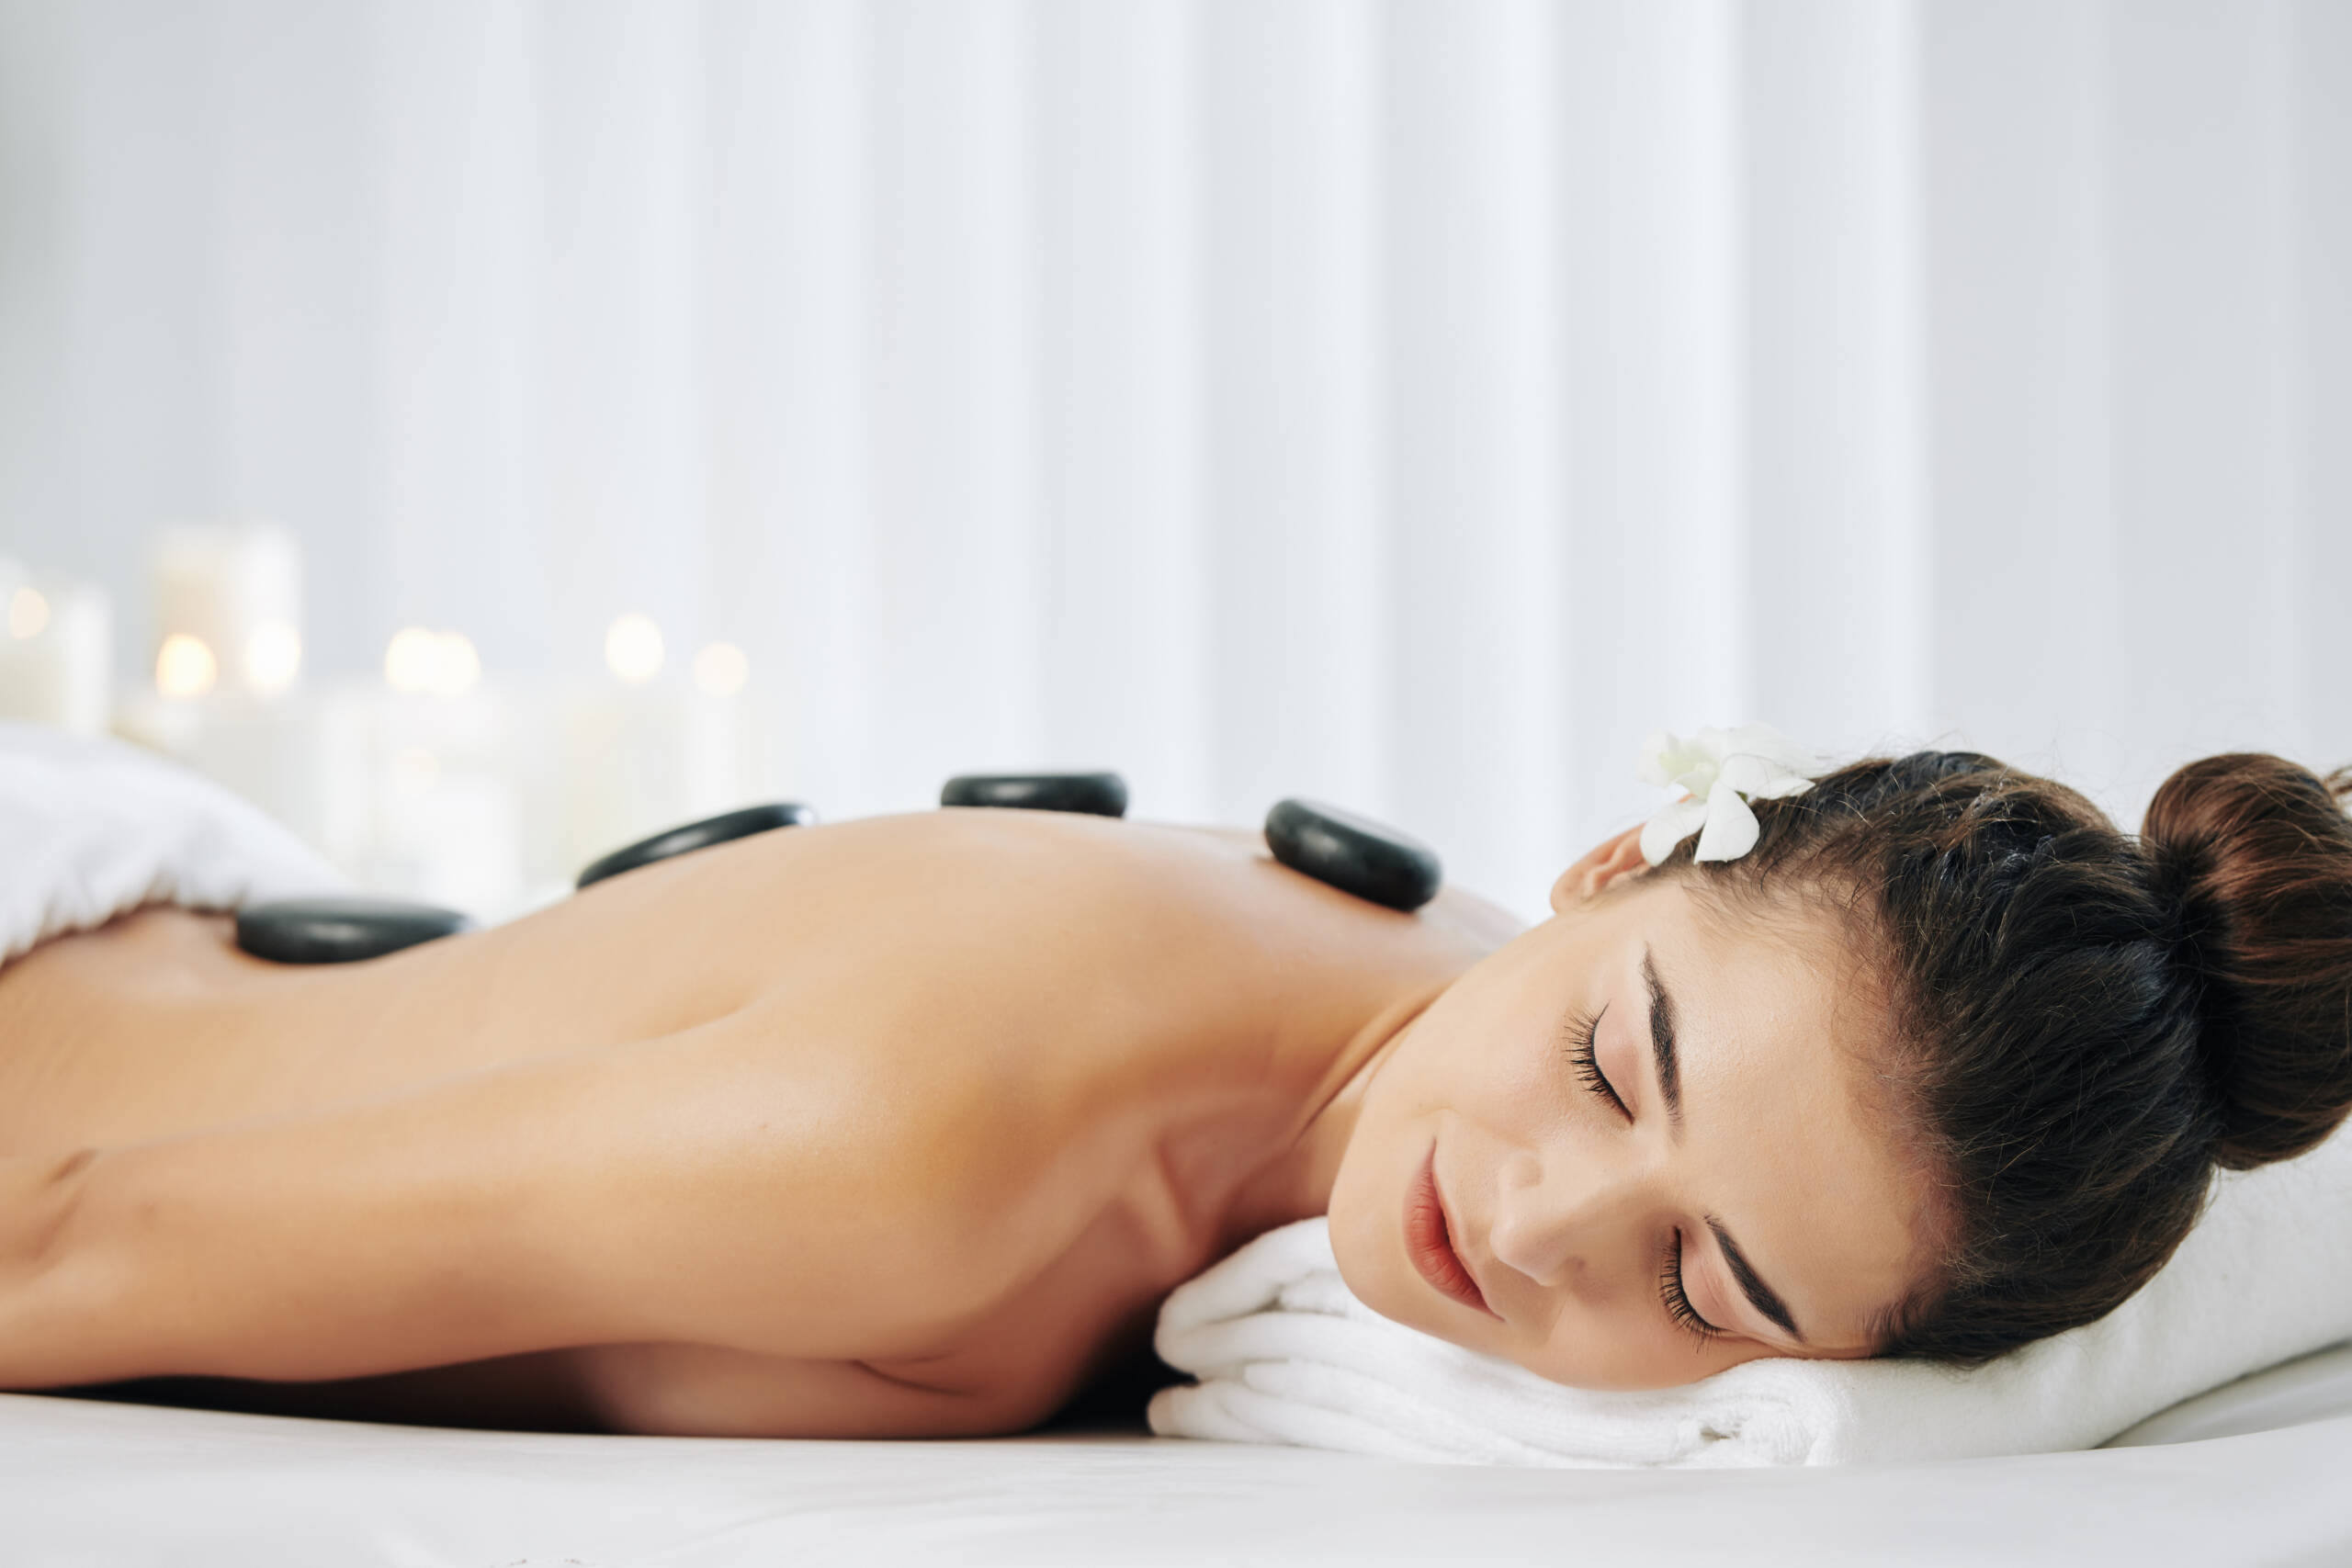 Break the tension with a Hot Stone Massage at Esther's Wellhouse